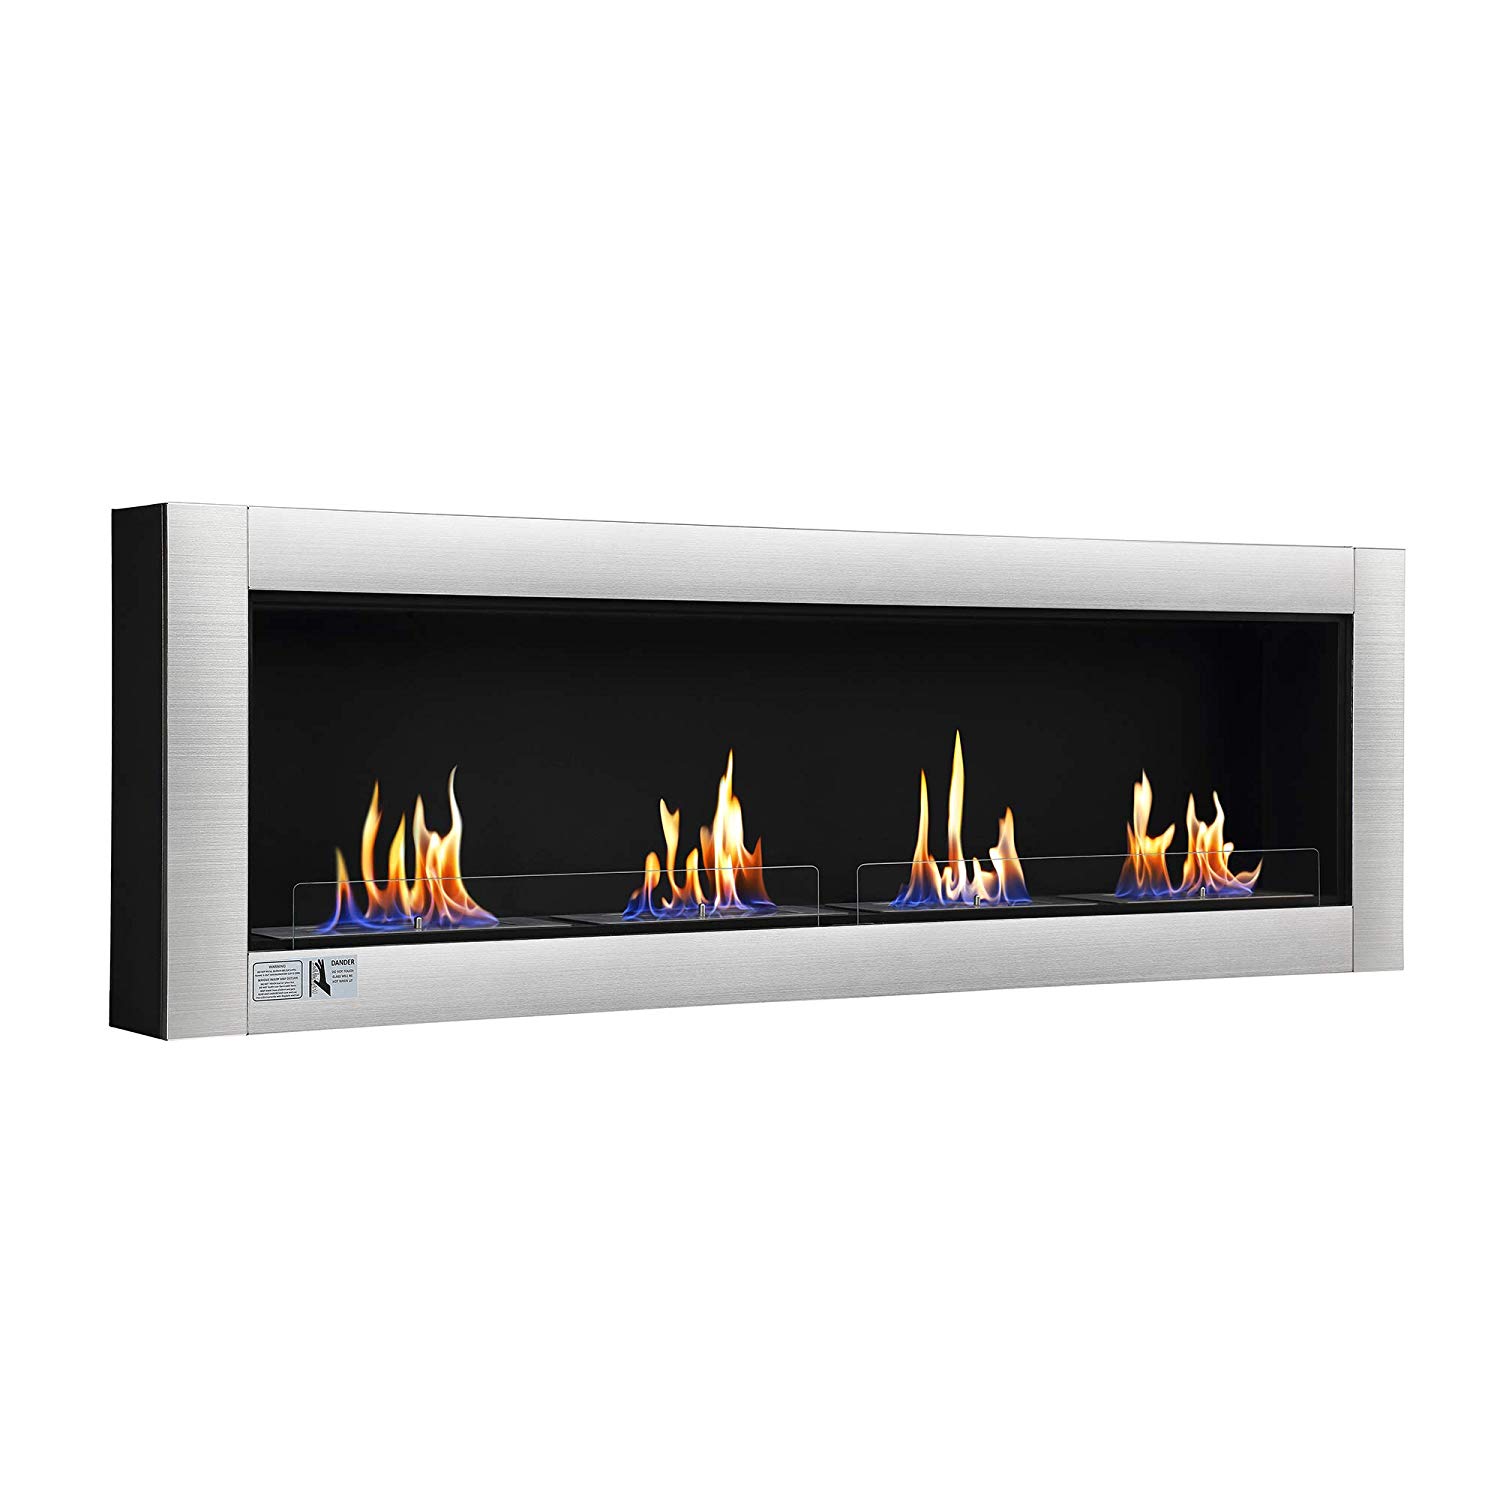 Twin Star Electric Fireplace Troubleshooting Lovely Amazon Antarctic Star 66" Ventless Ethanol Fireplace